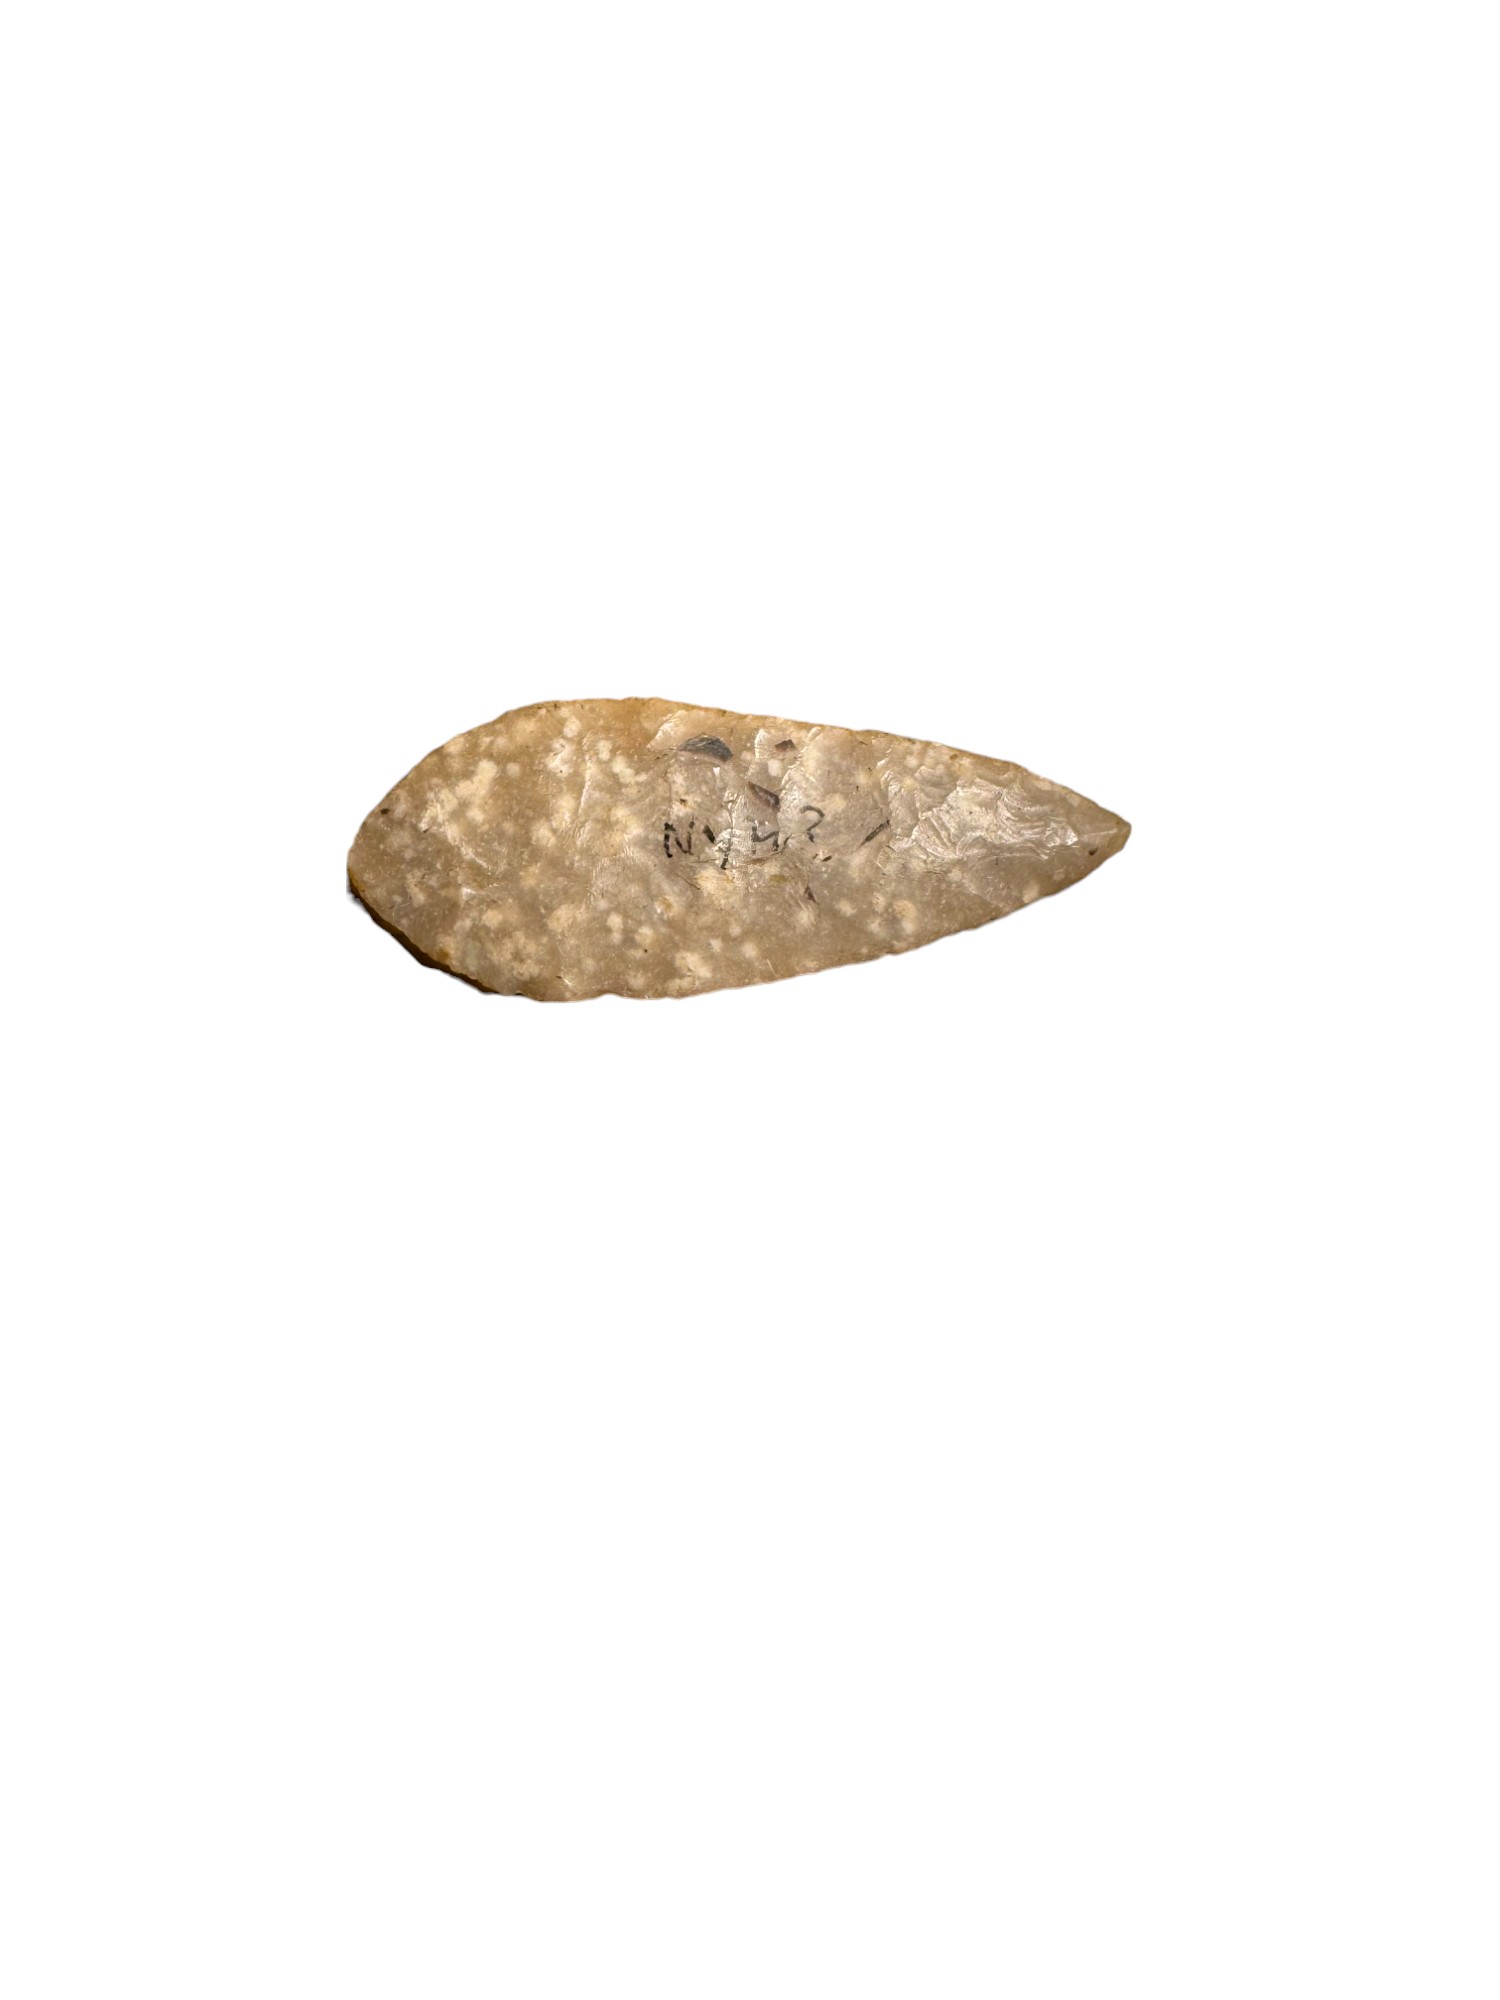 Antiquities: English Neolithic Stone Age Arrow Head, Yorkshire Find